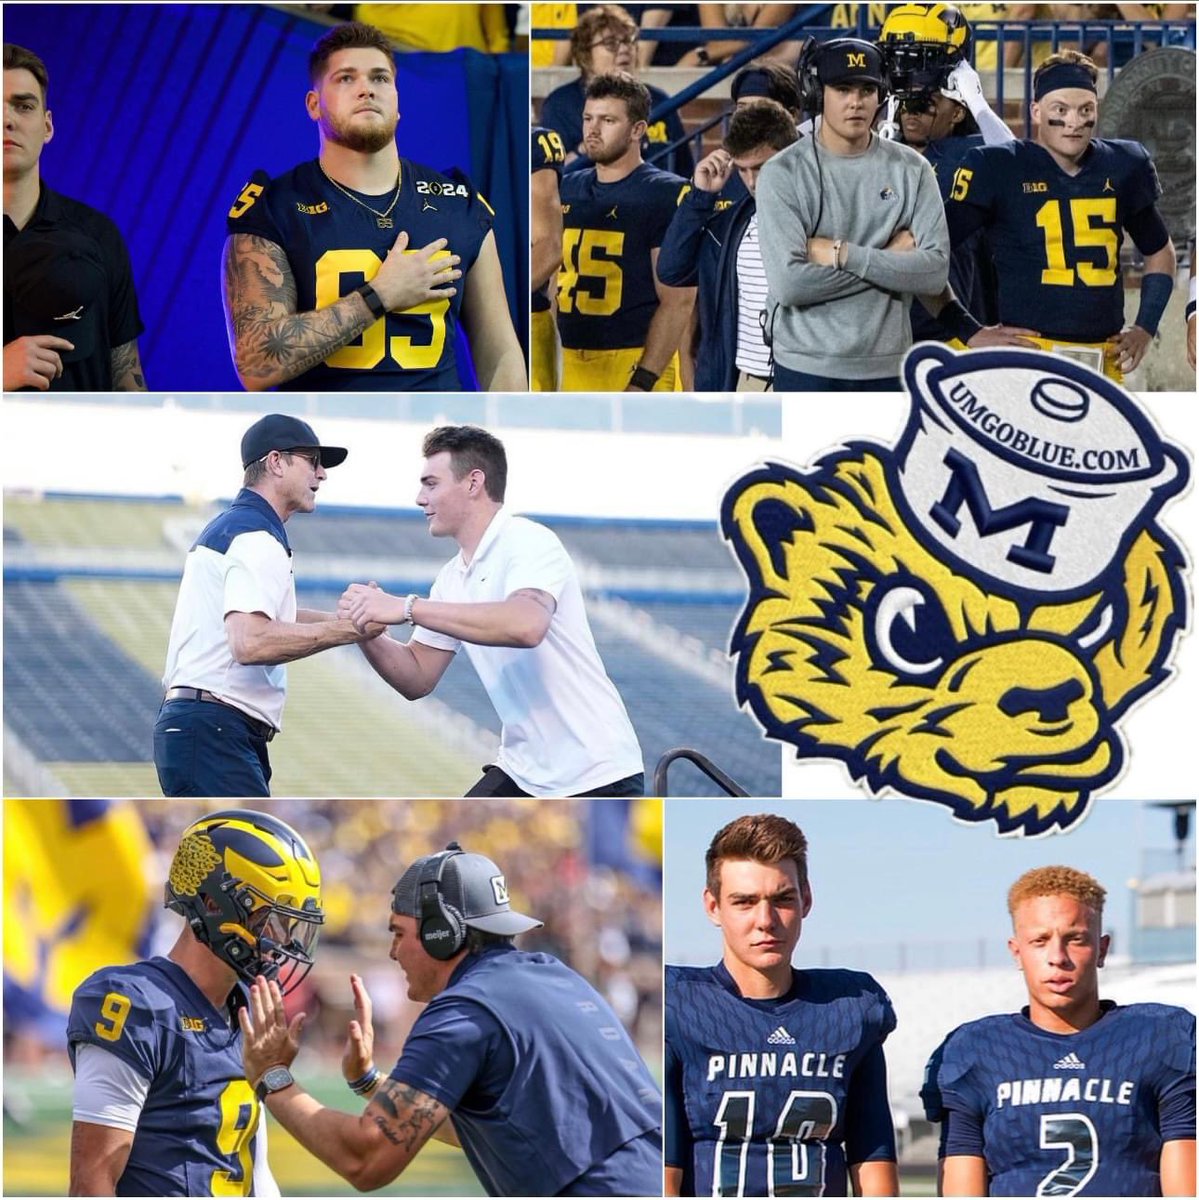 'Who's the guy next to Zak Zinter?!' That was a question we got a few times when we posted the picture from the National Championship game in the top left corner.... the answer?! Remember JD Johnson? He was a QB commit to Jim Harbaugh & the Wolverines in the class of 2020. JD…